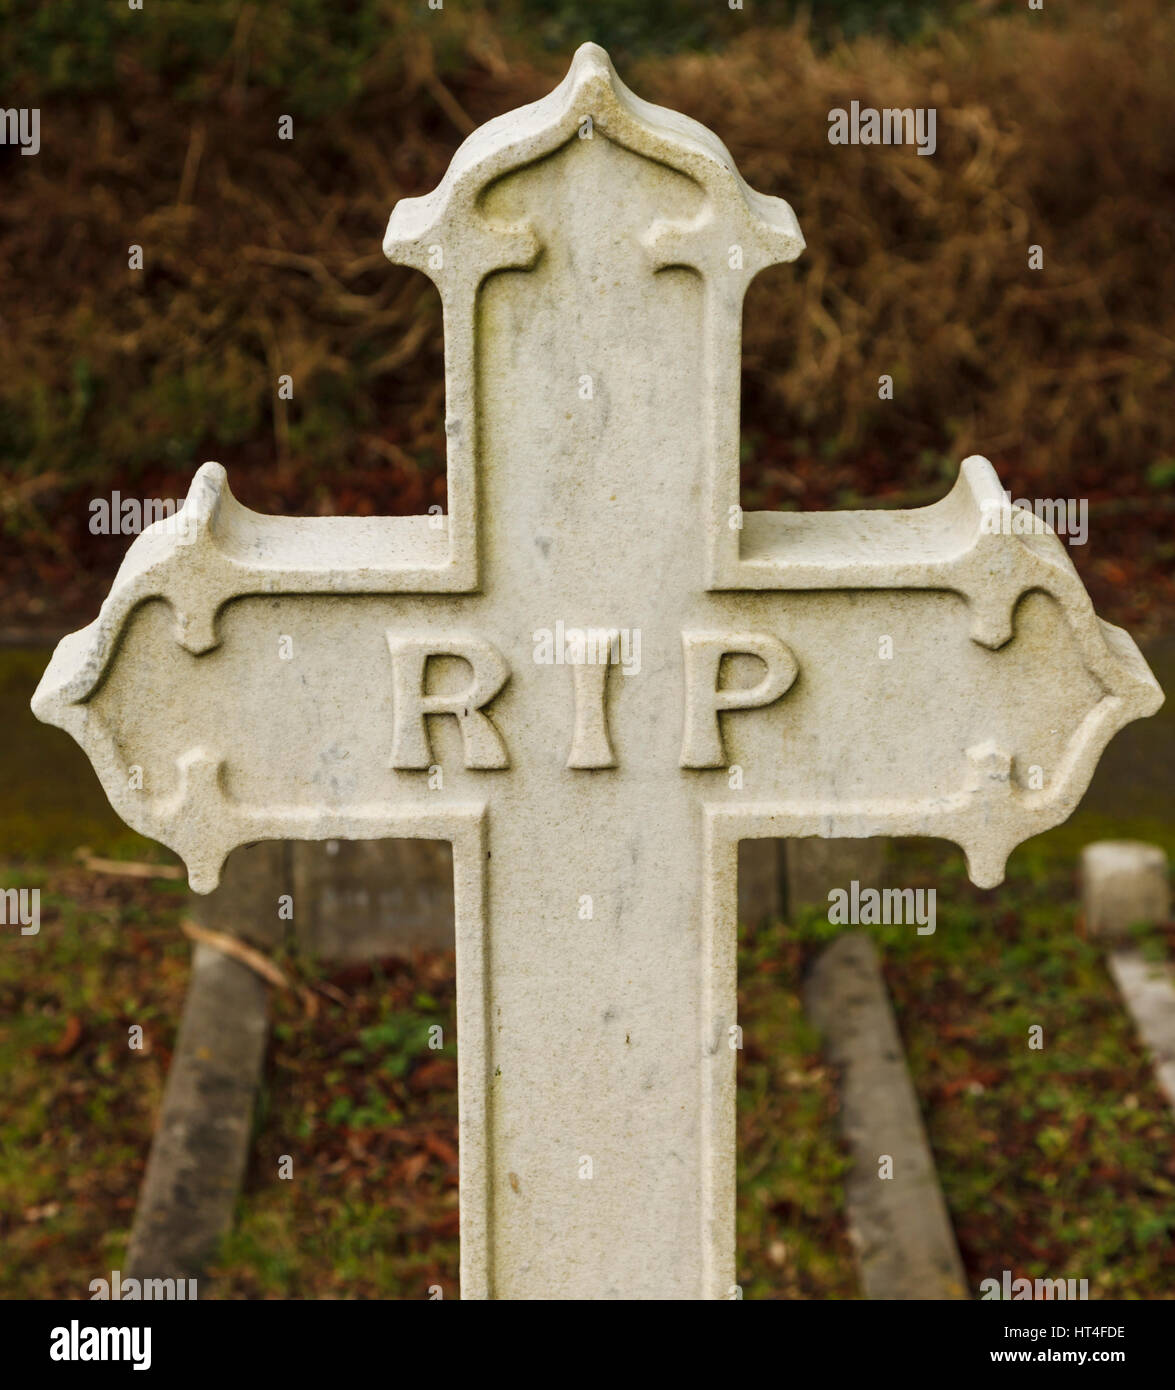 RIP on a headstone in High Wycombe Cemetery Stock Photo